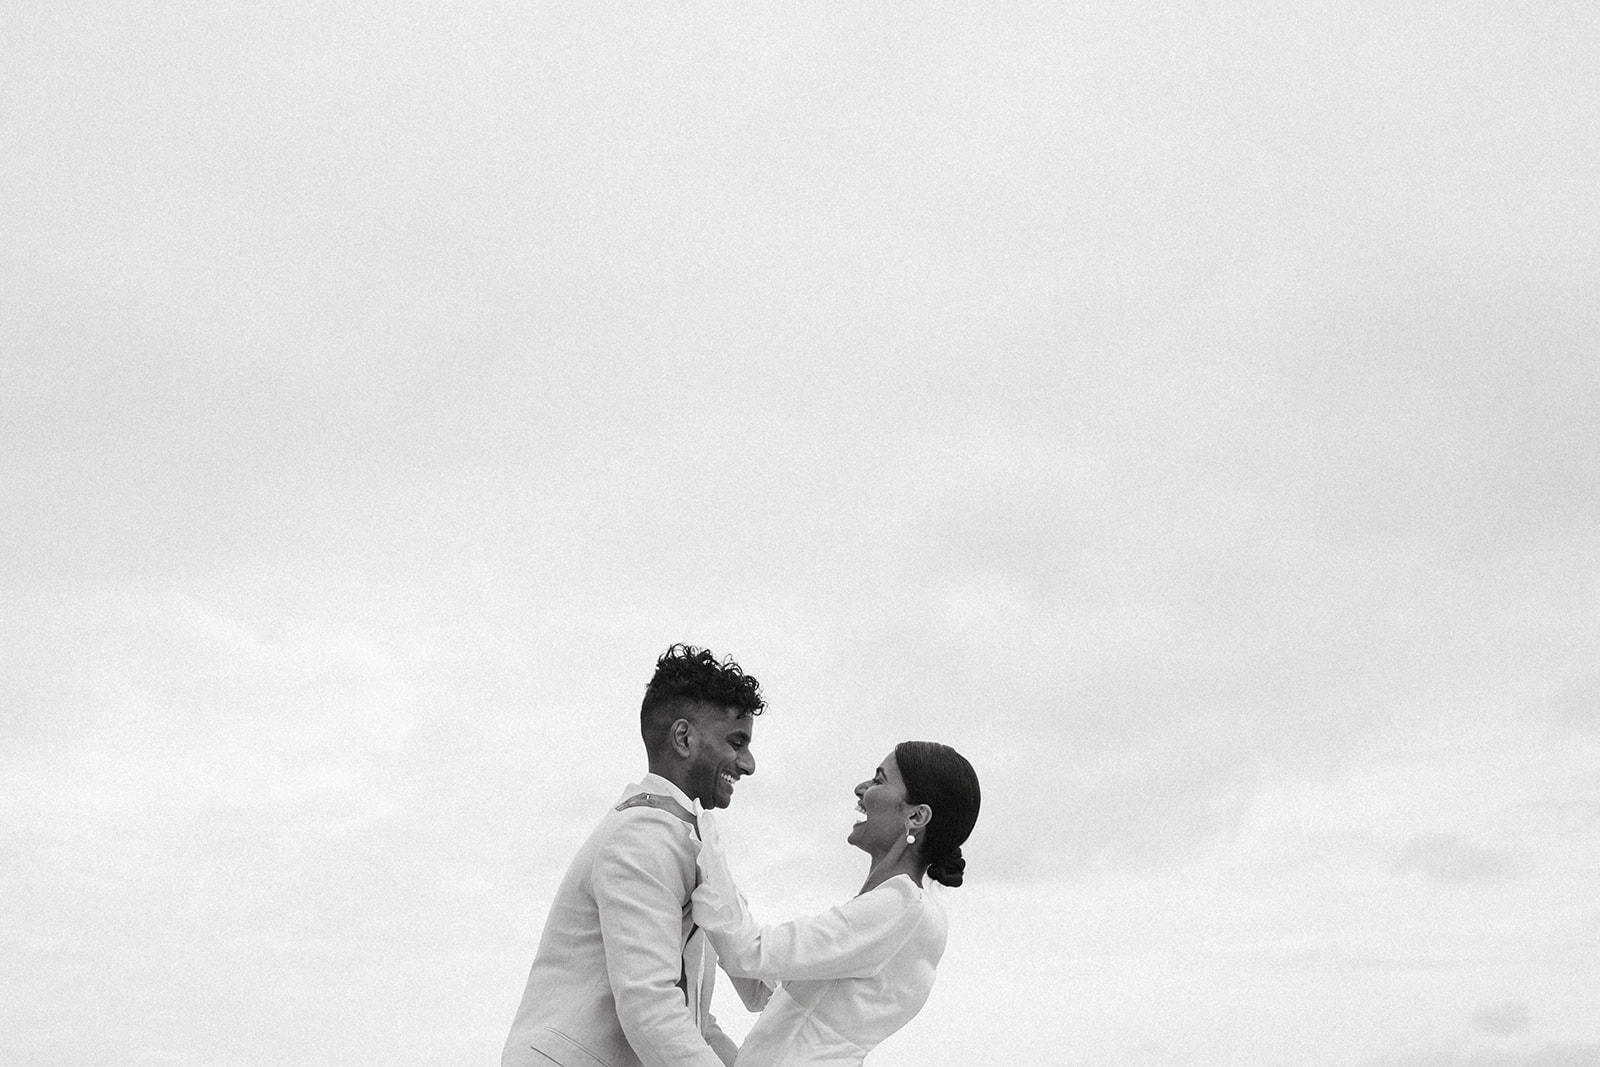 Minimal eloping couple destination wedding photographer based in UK Claire Coulthard Photography